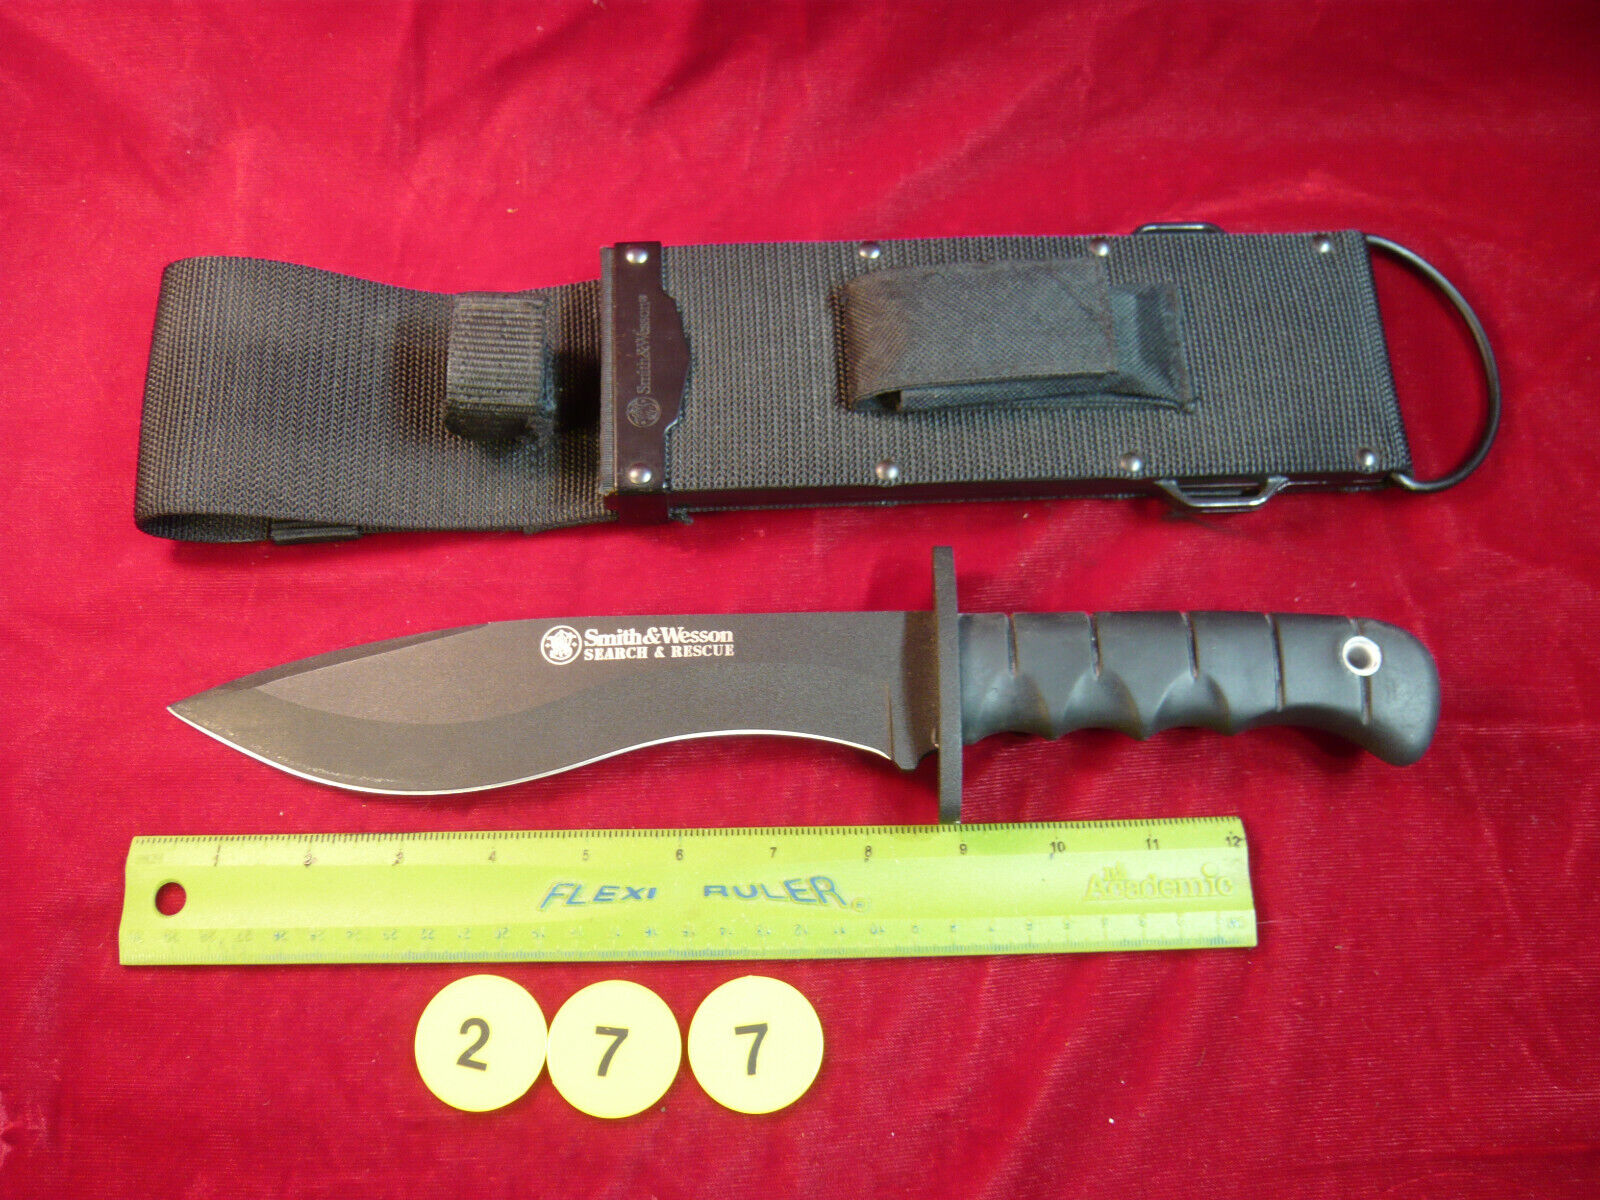 Smith & Wesson CKSUR7 Search & Rescue Military Combat Tactical Knife Stealth OOP